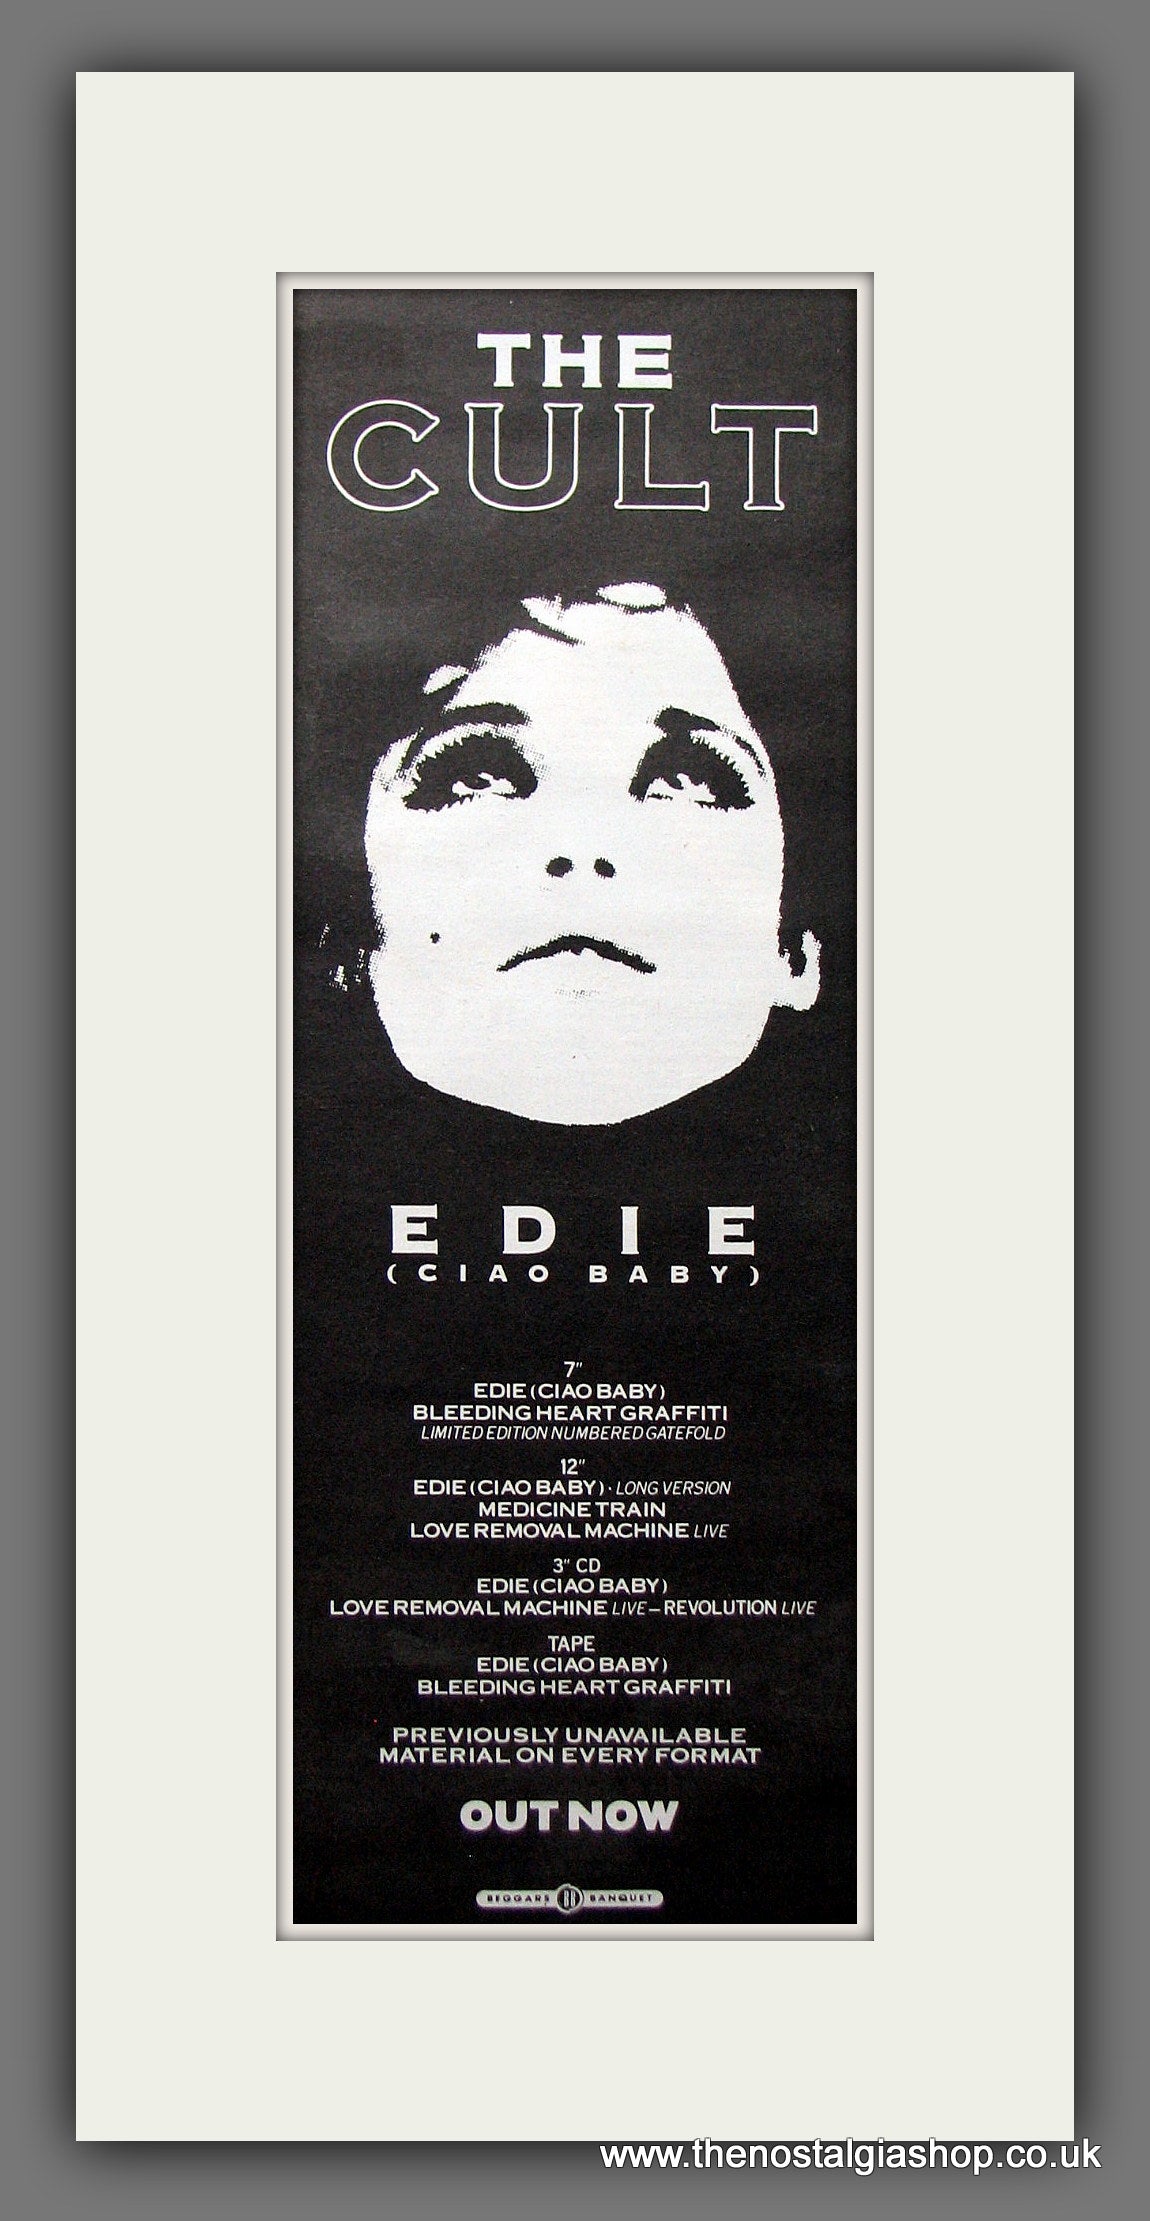 Cult (The) Edie. Ciao Baby. Original Advert 1989 (ref AD200241)